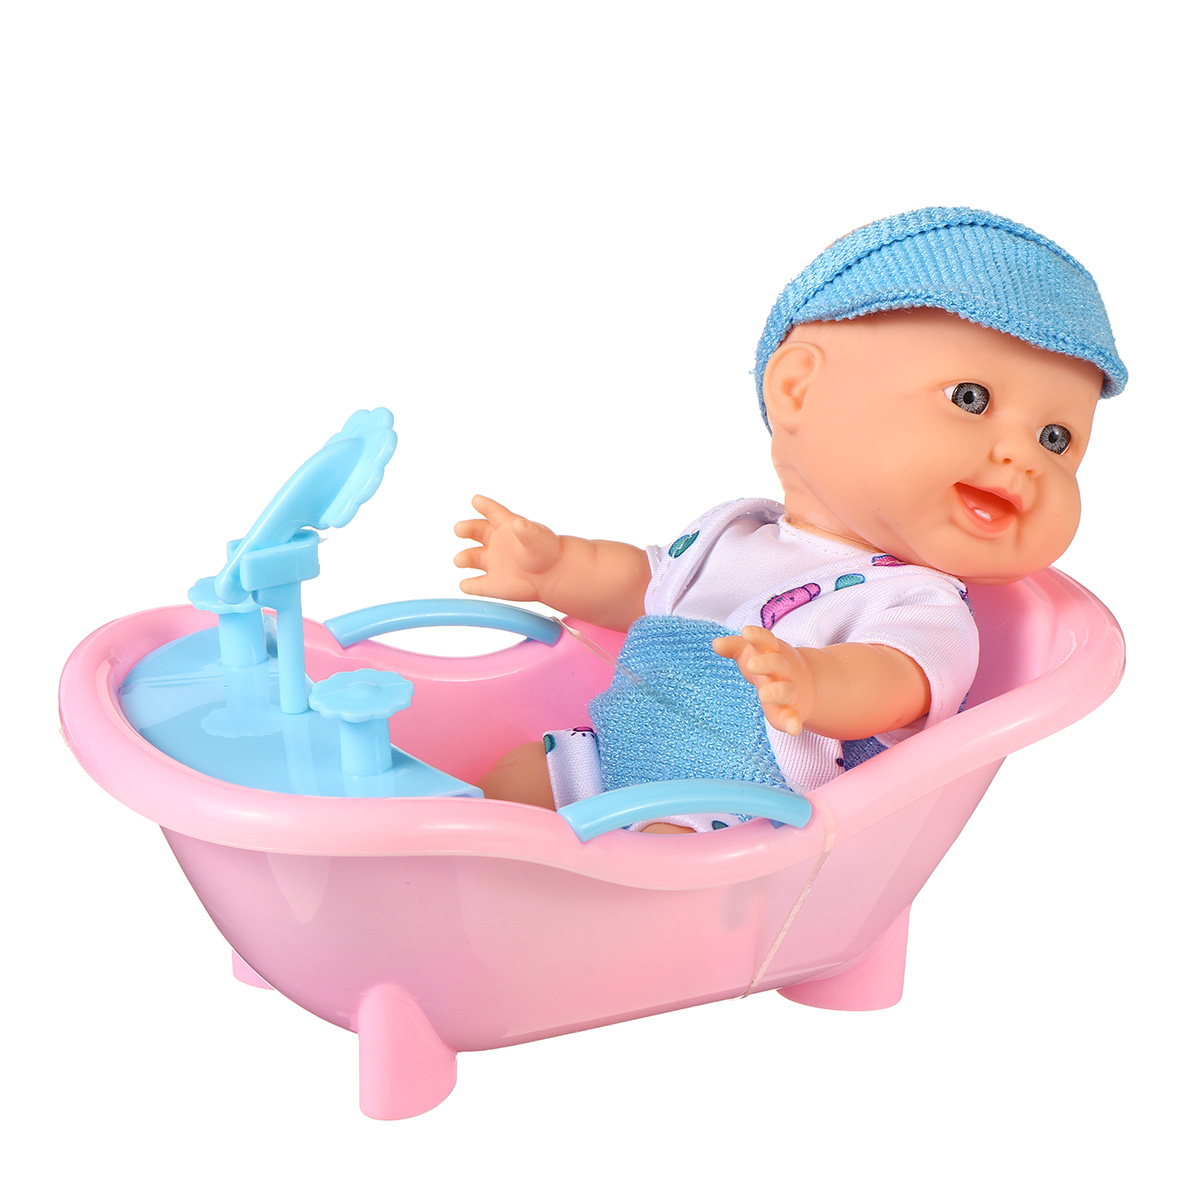 Simulation-Baby-3D-Creative-Cute-Doll-Play-House-Toy-Doll-Vinyl-Doll-Gift-1818656-11